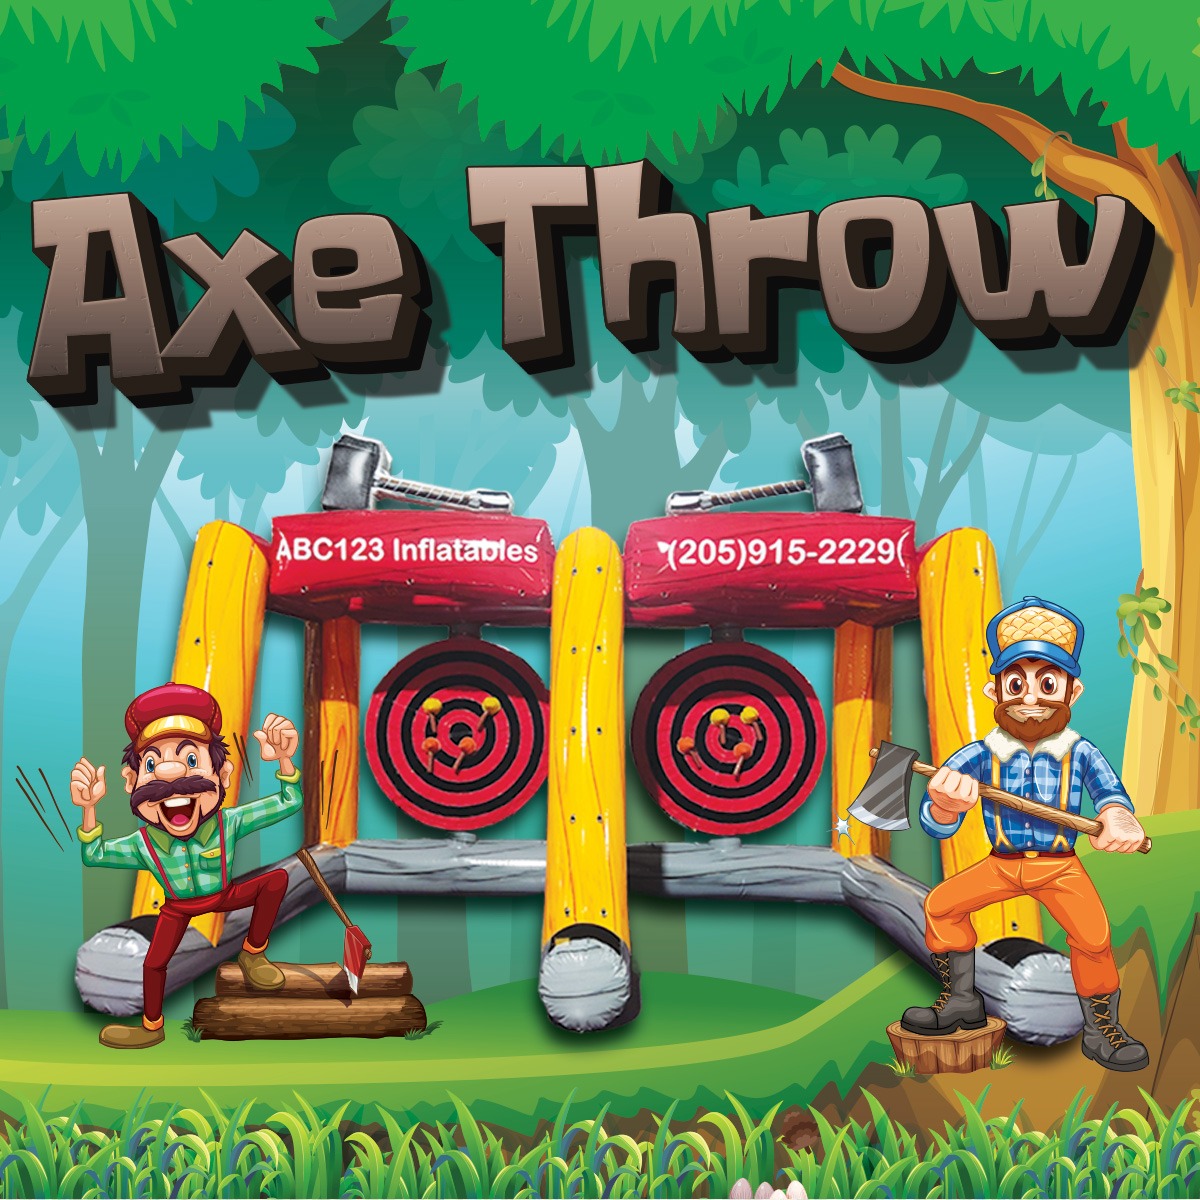 Axe Throw Inflatable Interactive Game - ABC123 Inflatables - Birmingham AL